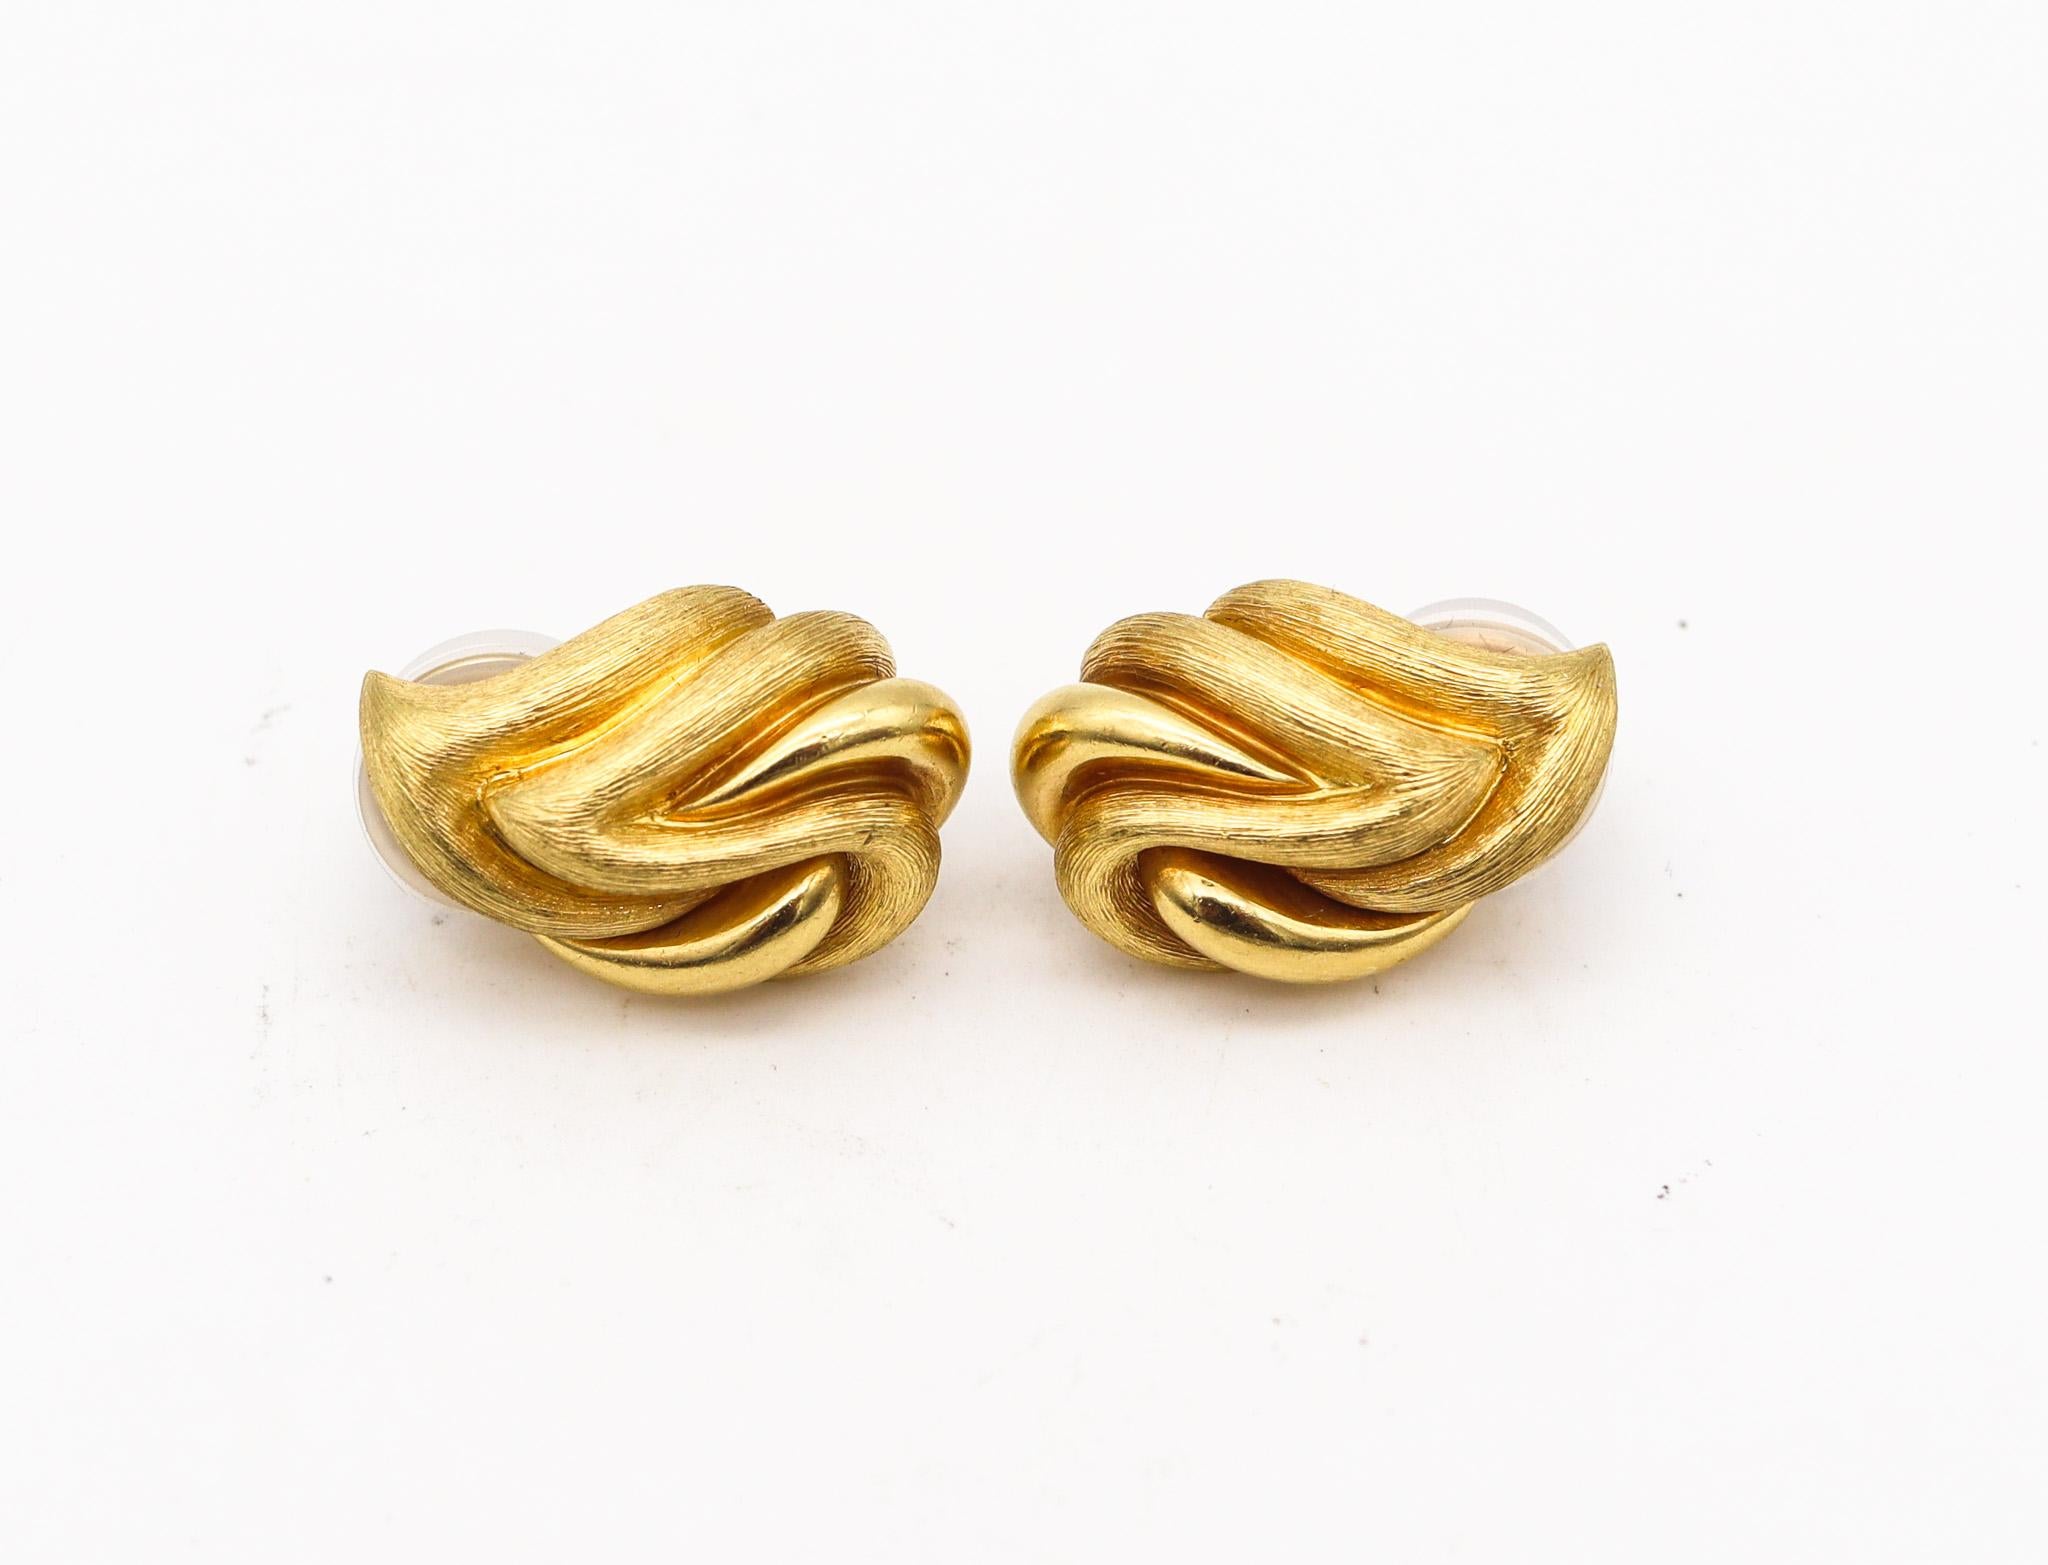 Earrings designed by Henry Dunay.

Very nice pair of clip-on earrings, created in New York city at the jewelry atelier of Henry Dunay, back in the 1990. This pair is very beautiful with a very smart look and should be great addition to your jewelry